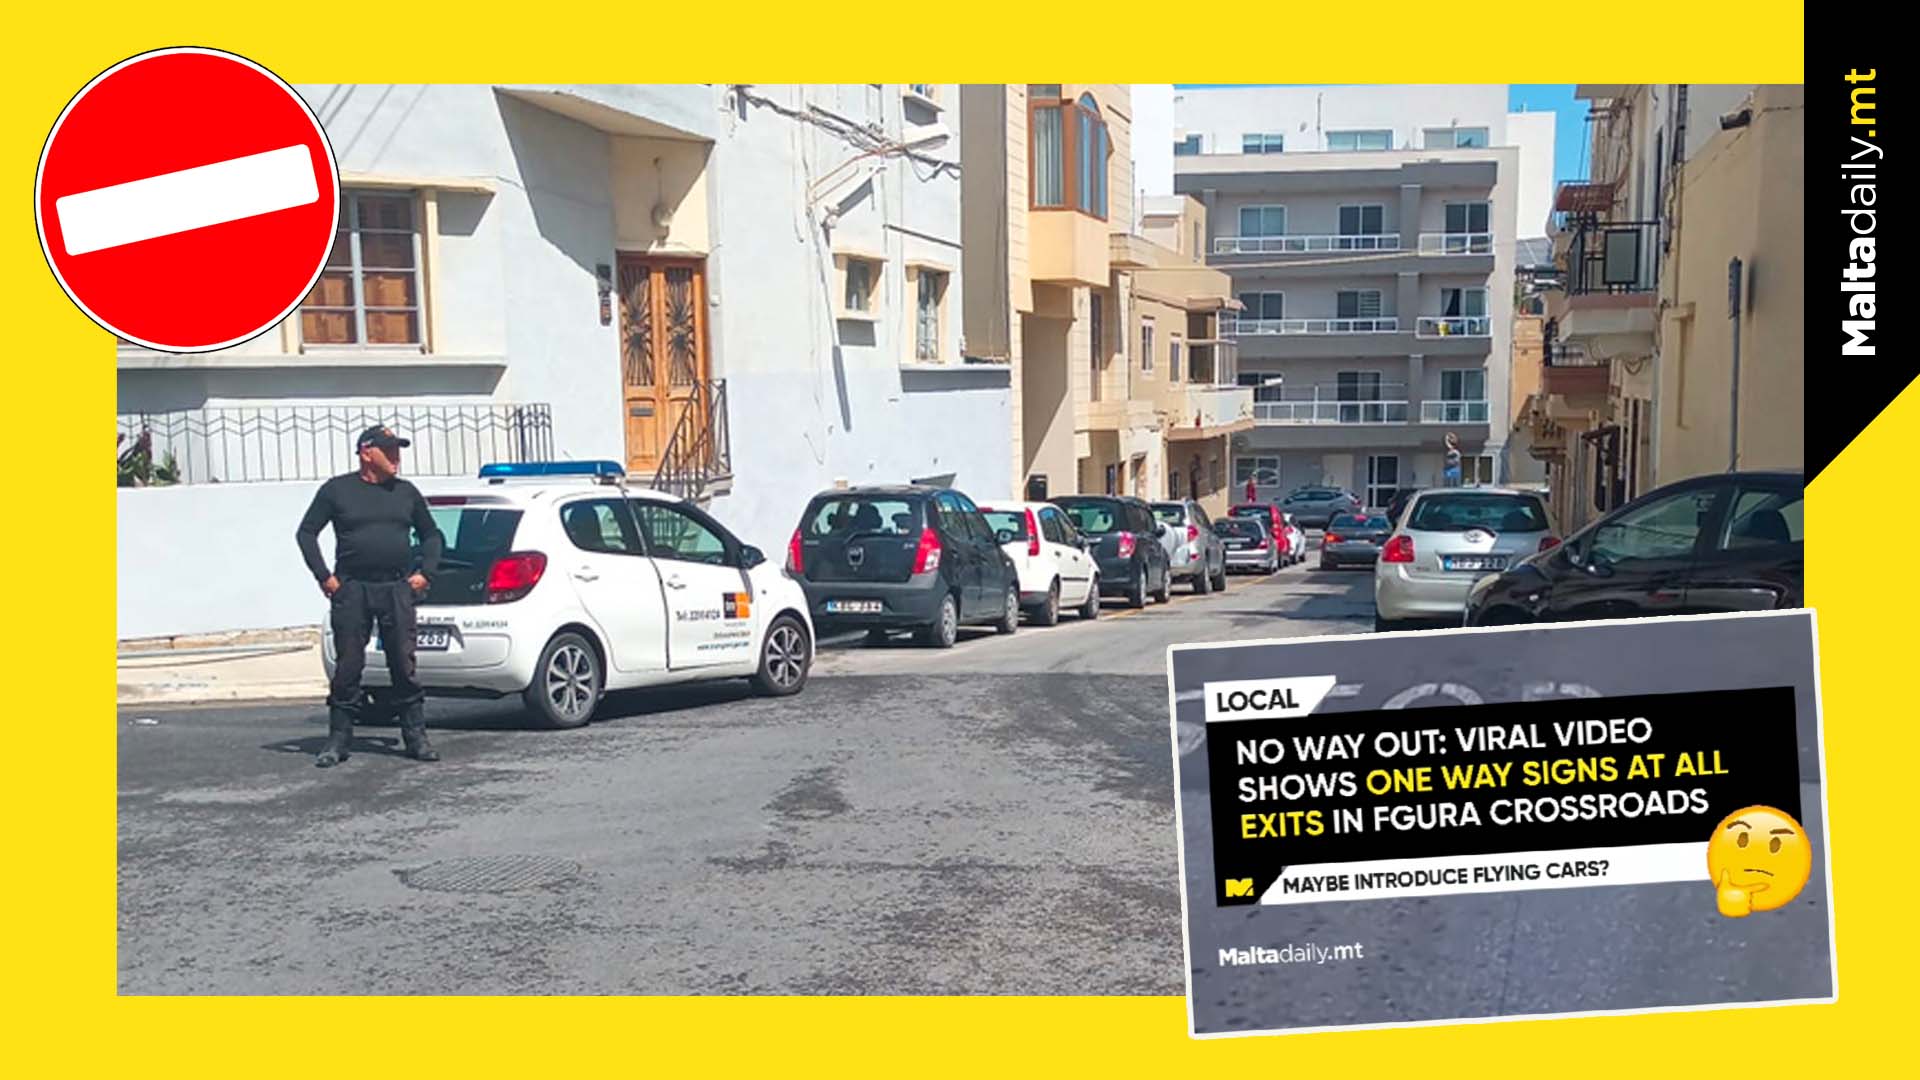 Transport Malta takes action after 'no exit Fgura crossroads' viral video